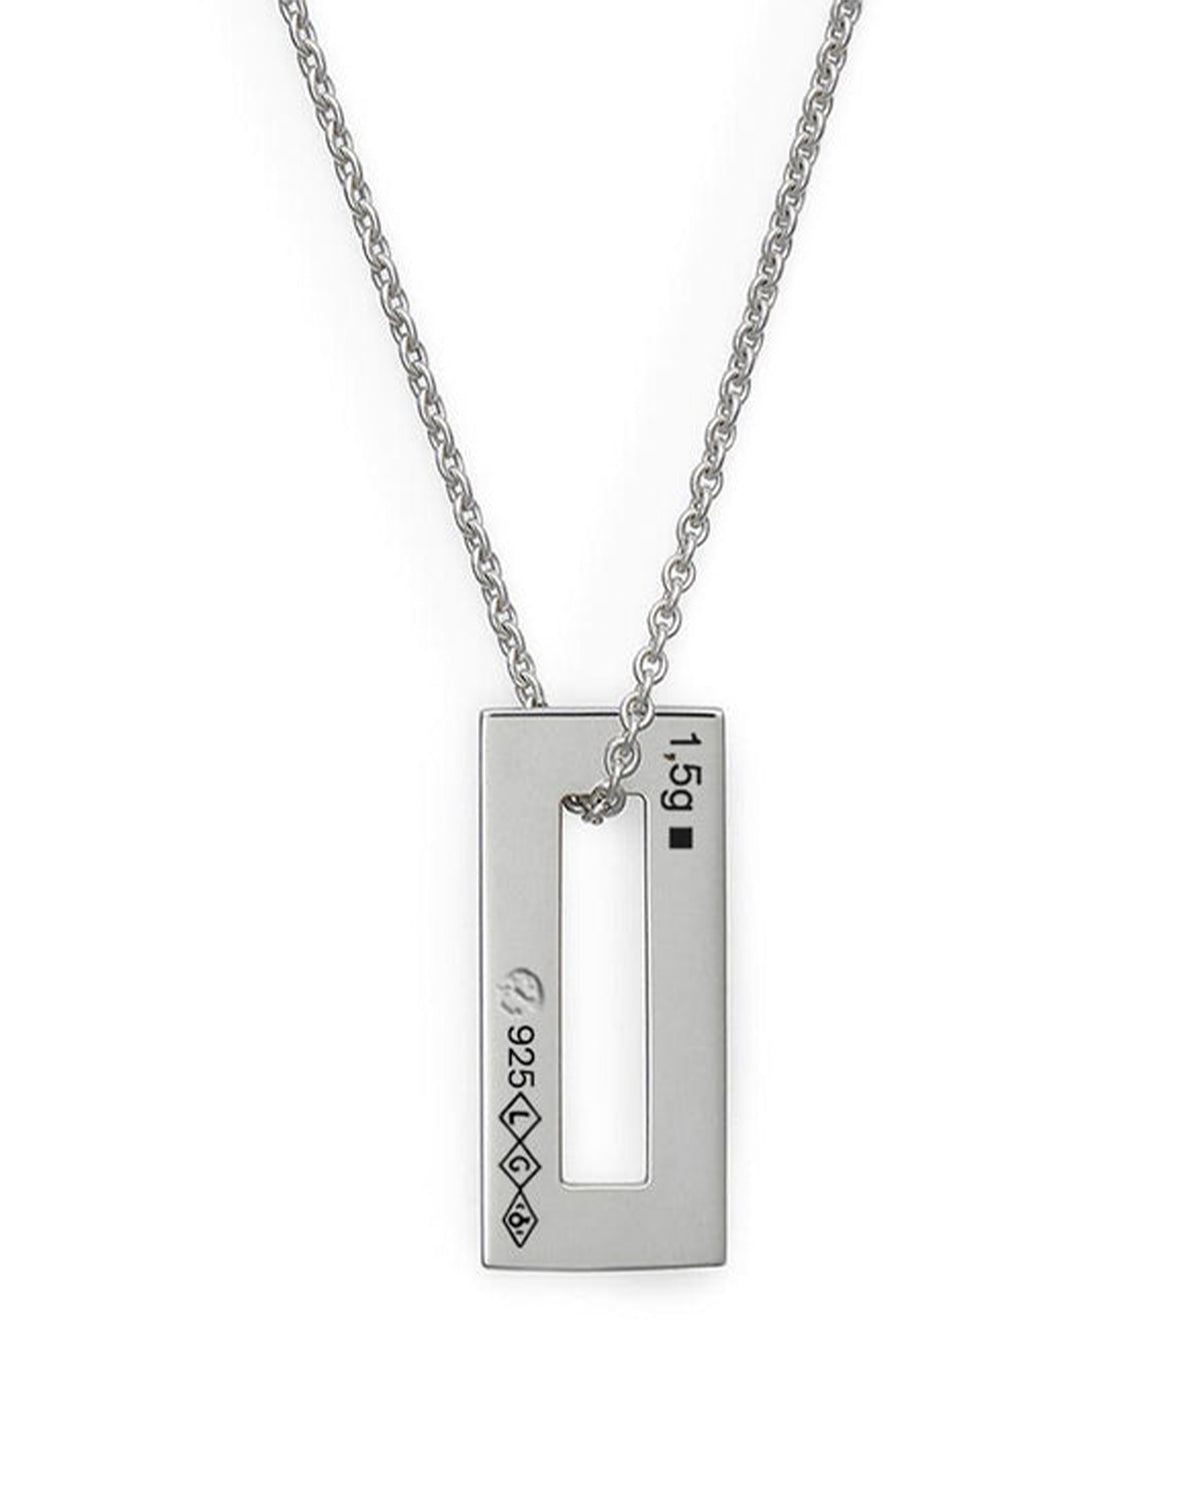 1.5G Polished And Brushed Necklace - Silver